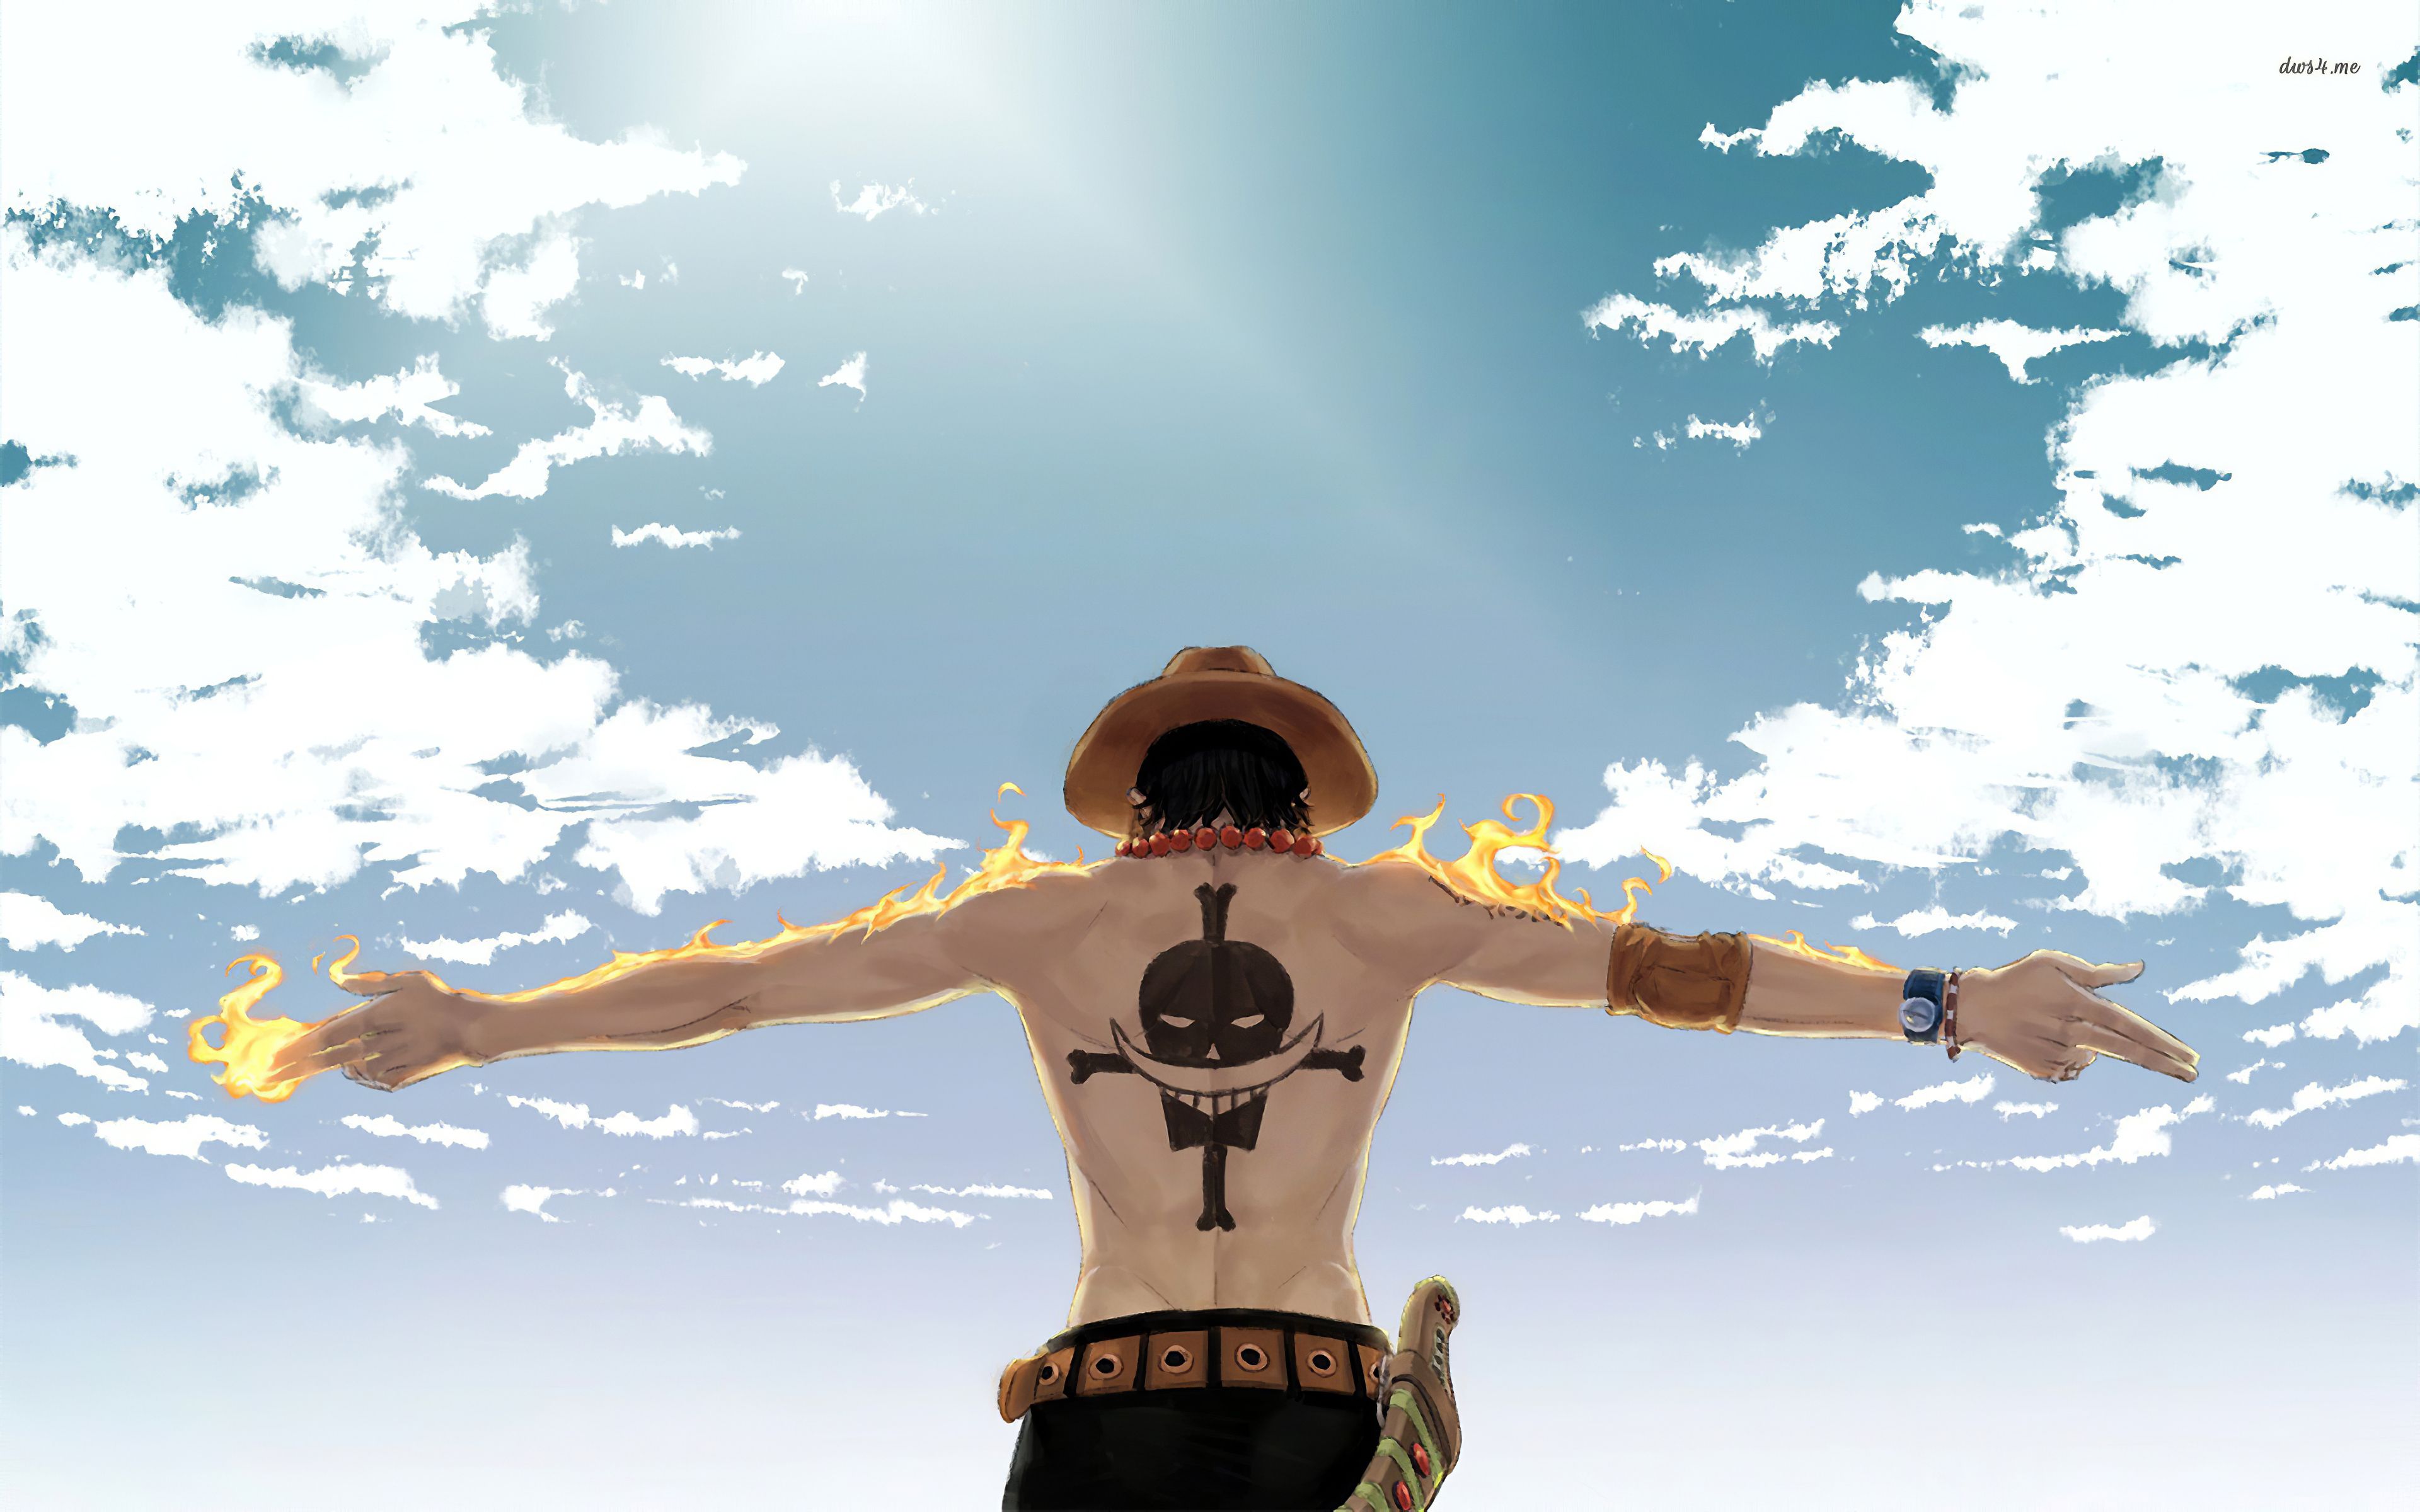 Top 999+ One Piece Aesthetic Wallpaper Full HD, 4K✓Free to Use